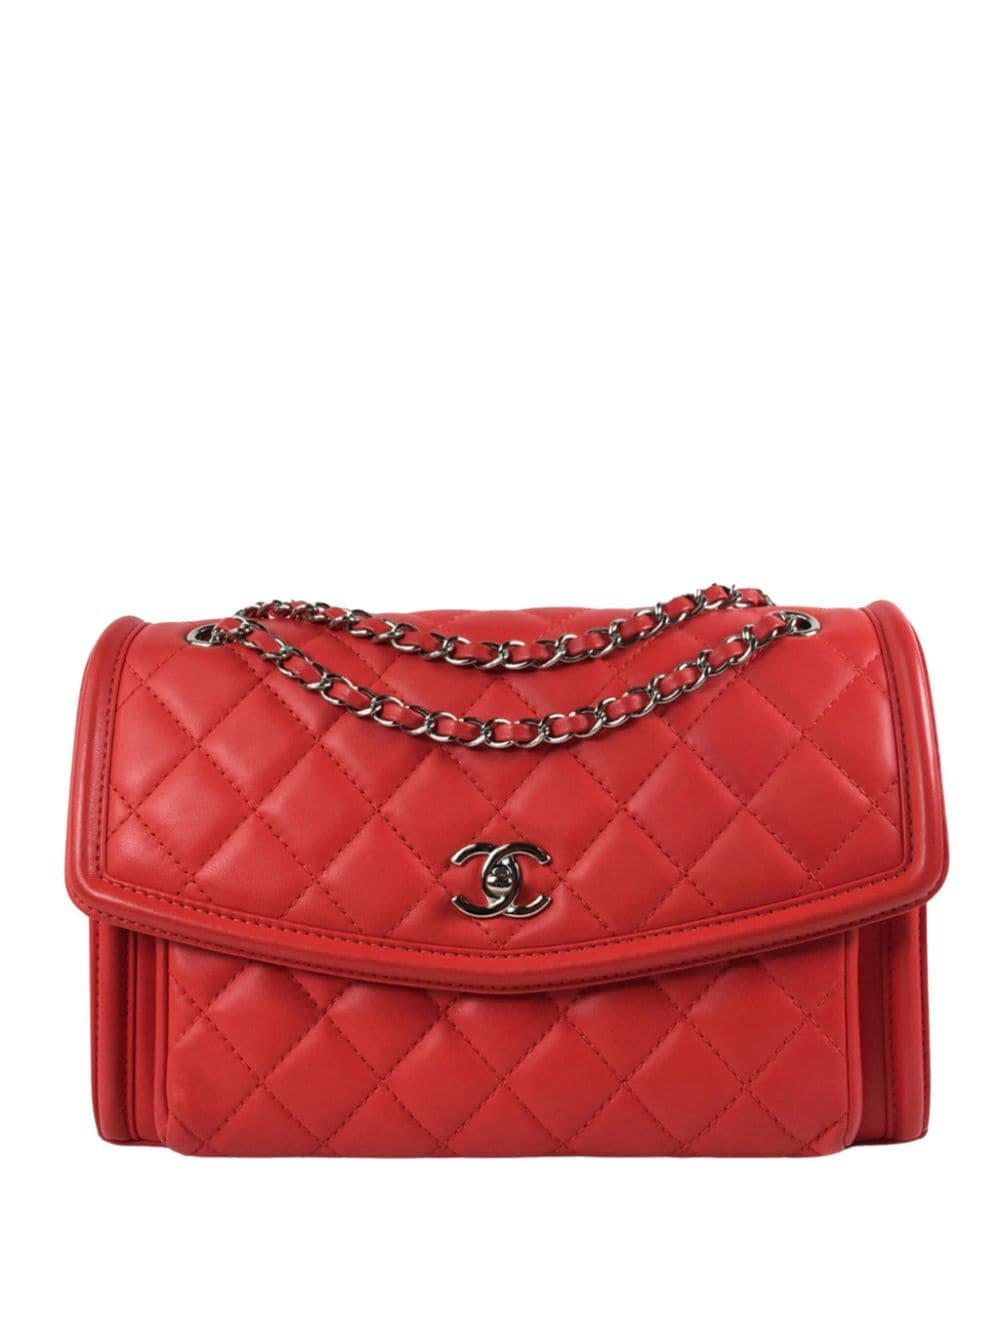 Pre-owned Chanel 2014-2015 Large Lambskin Geometric Flap Crossbody Bag In Red